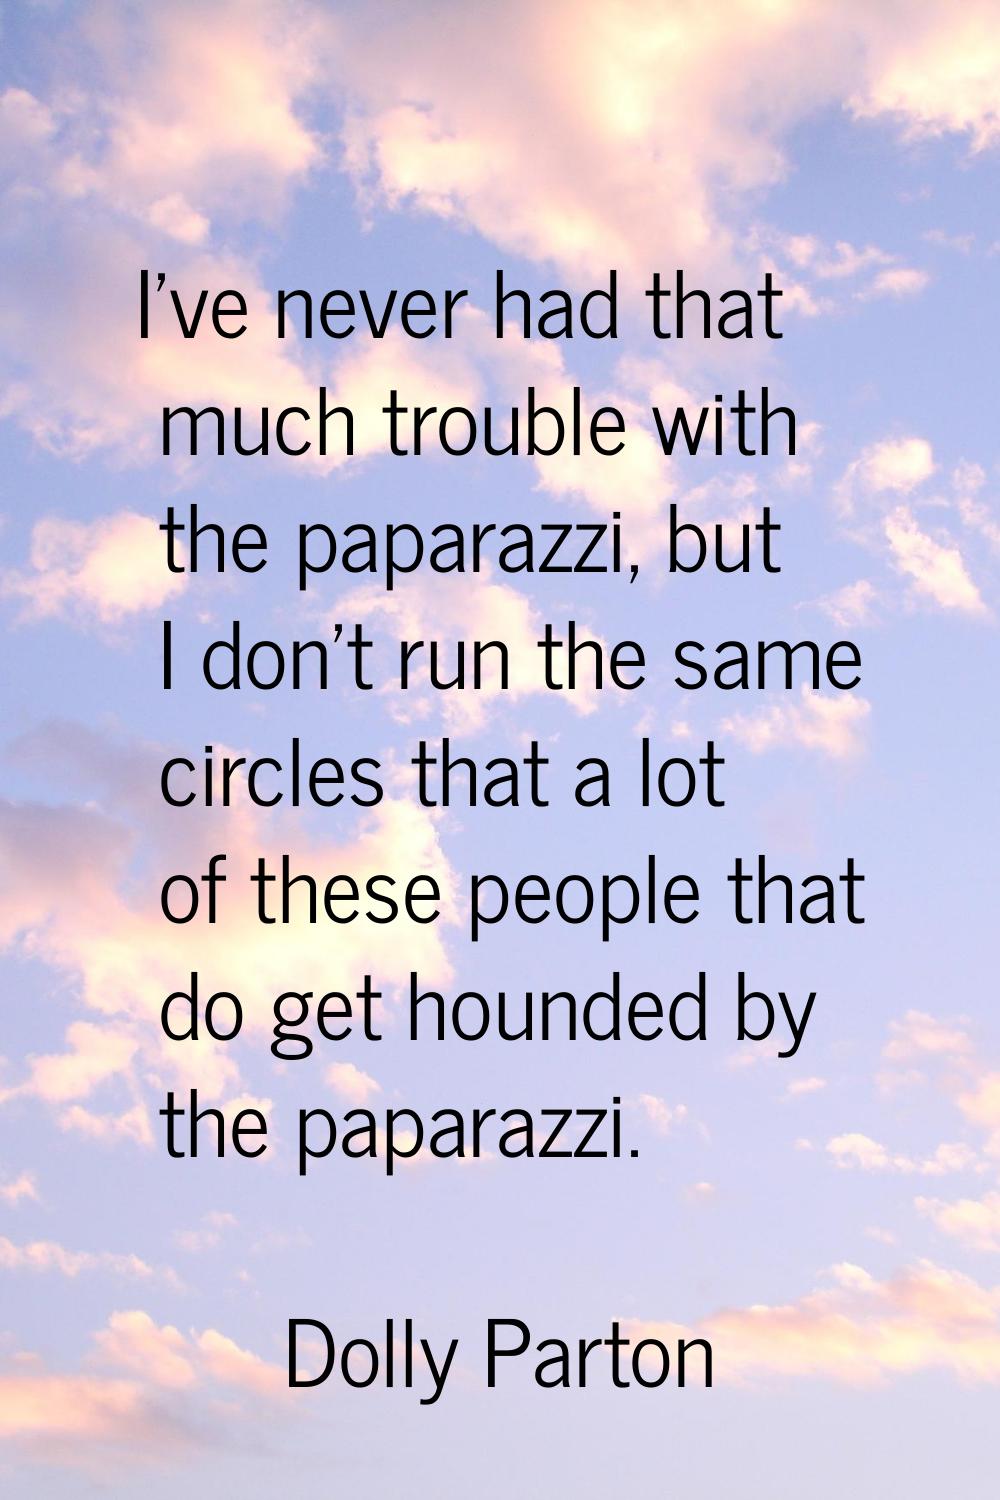 I've never had that much trouble with the paparazzi, but I don't run the same circles that a lot of